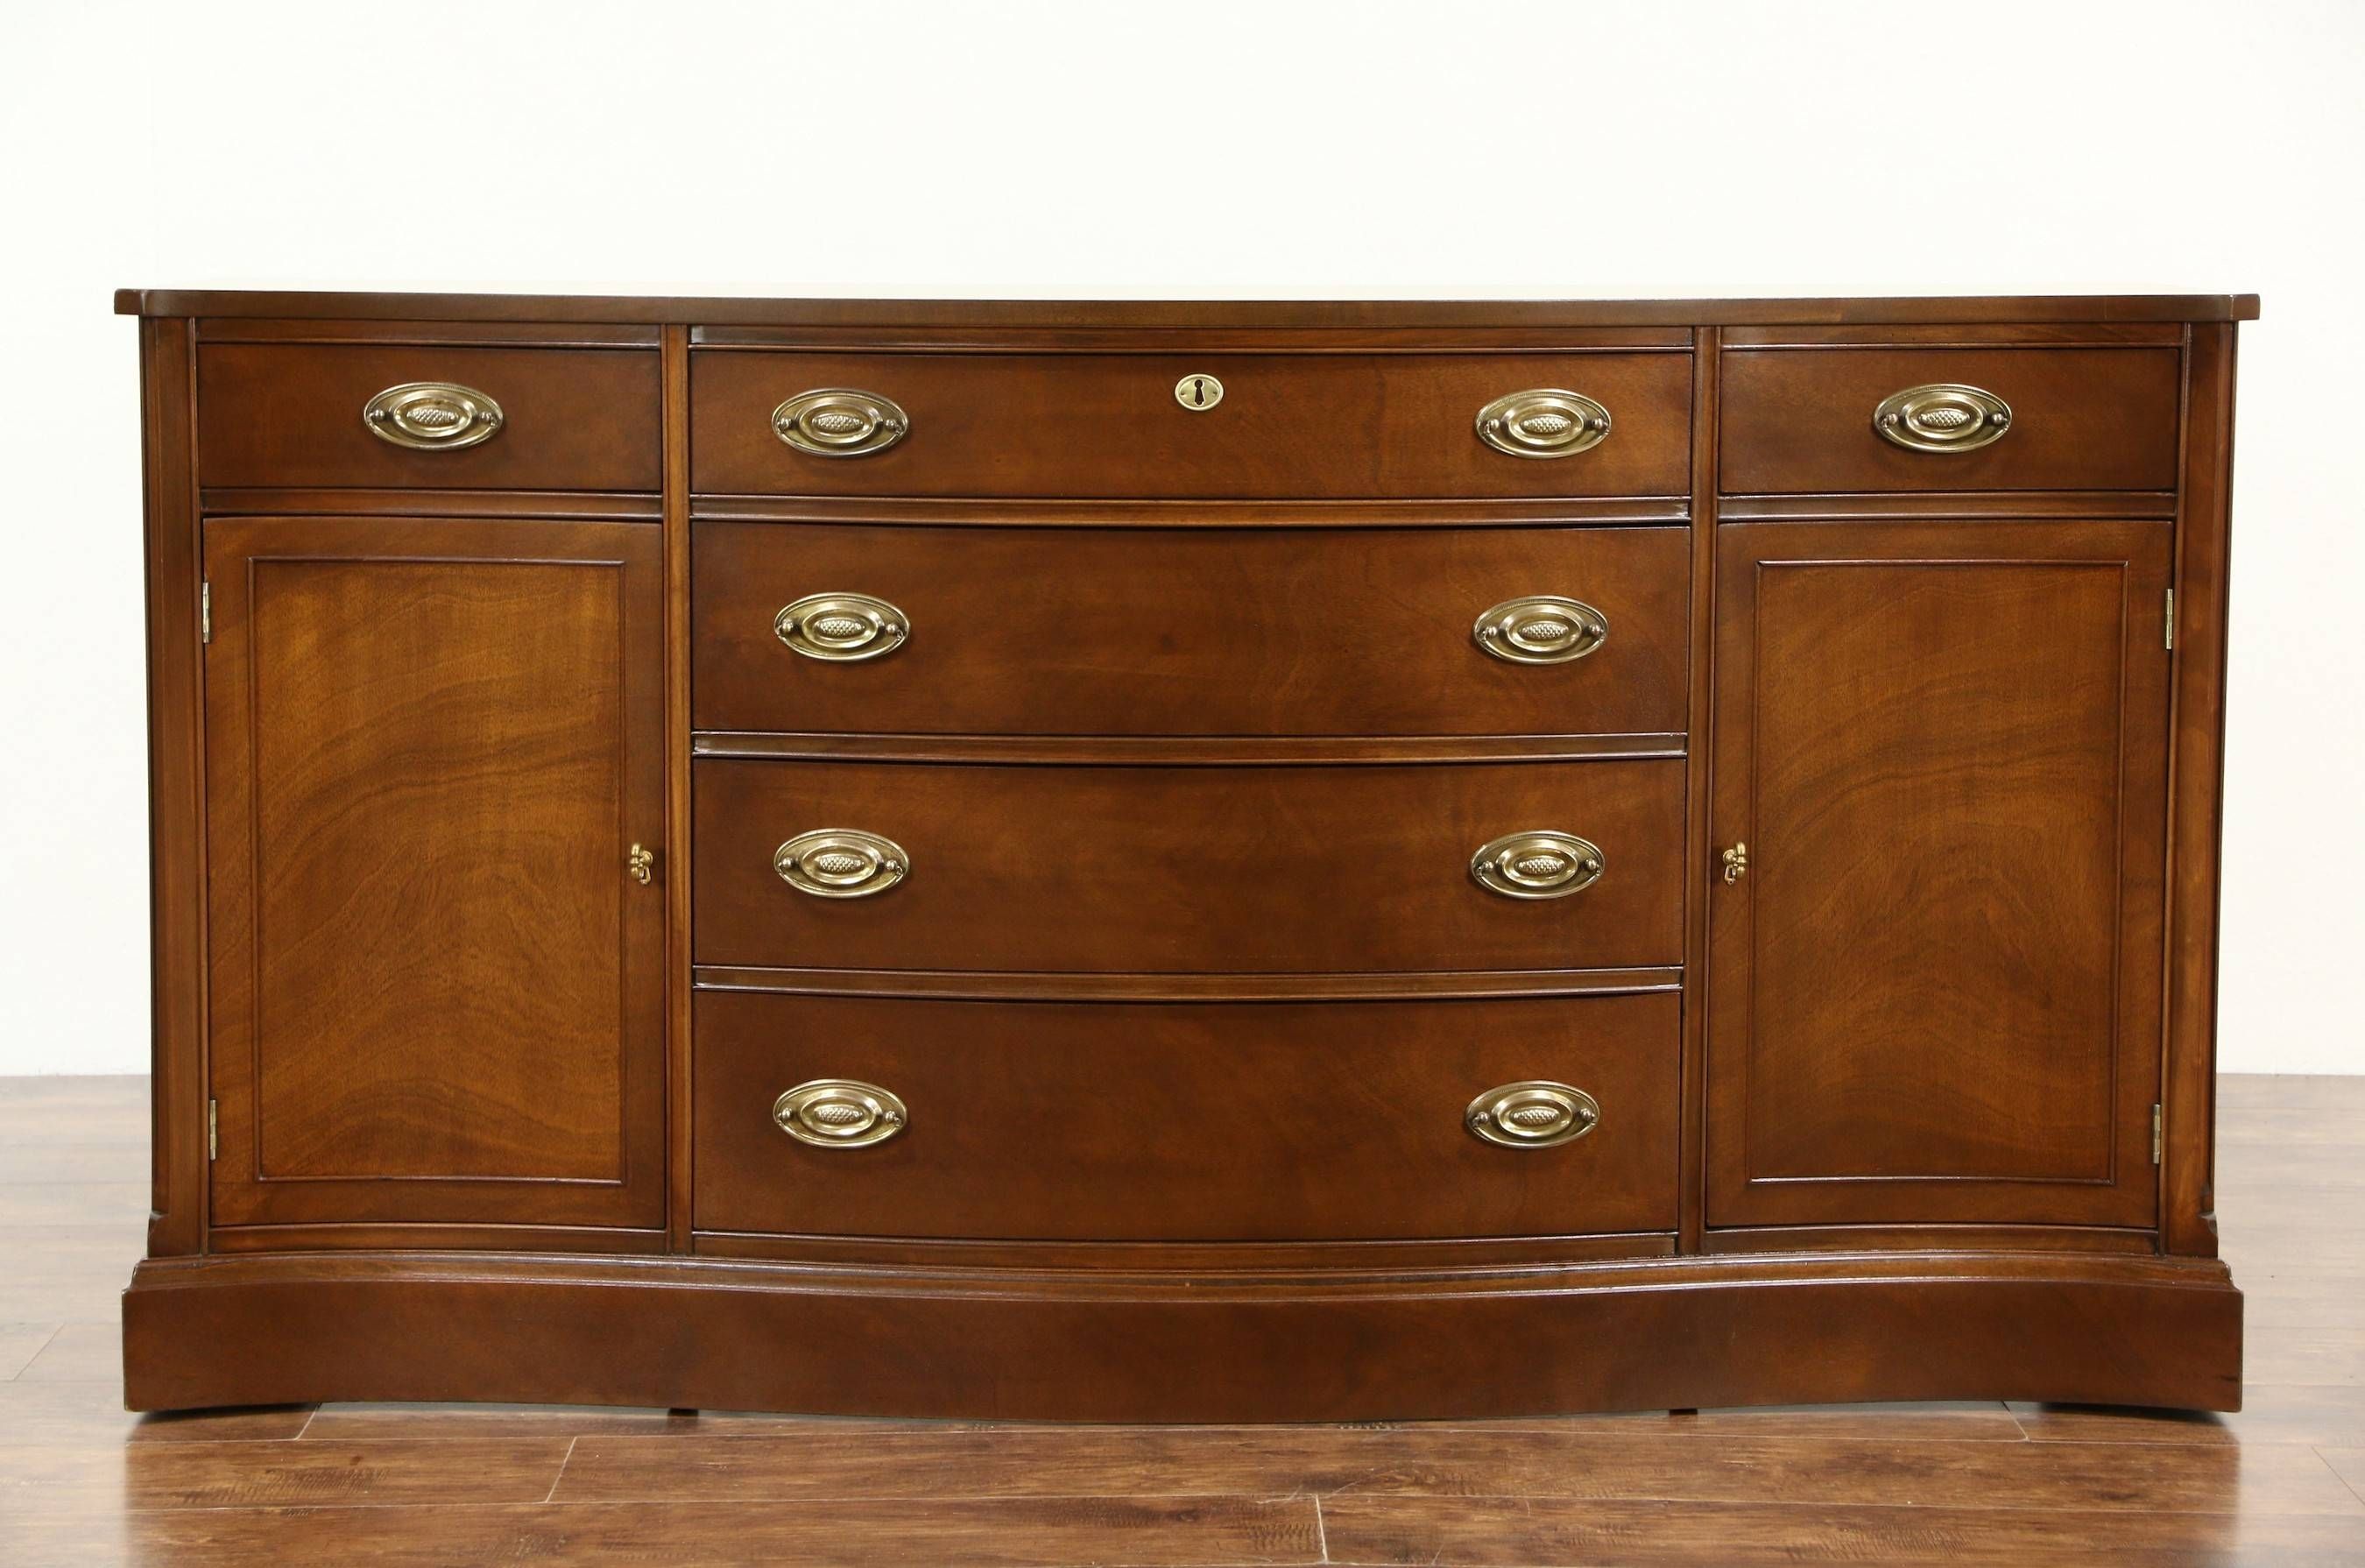 Sold – Traditional Vintage Mahogany Sideboard, Server Or Buffet Pertaining To Mahogany Sideboards Buffets (View 15 of 15)